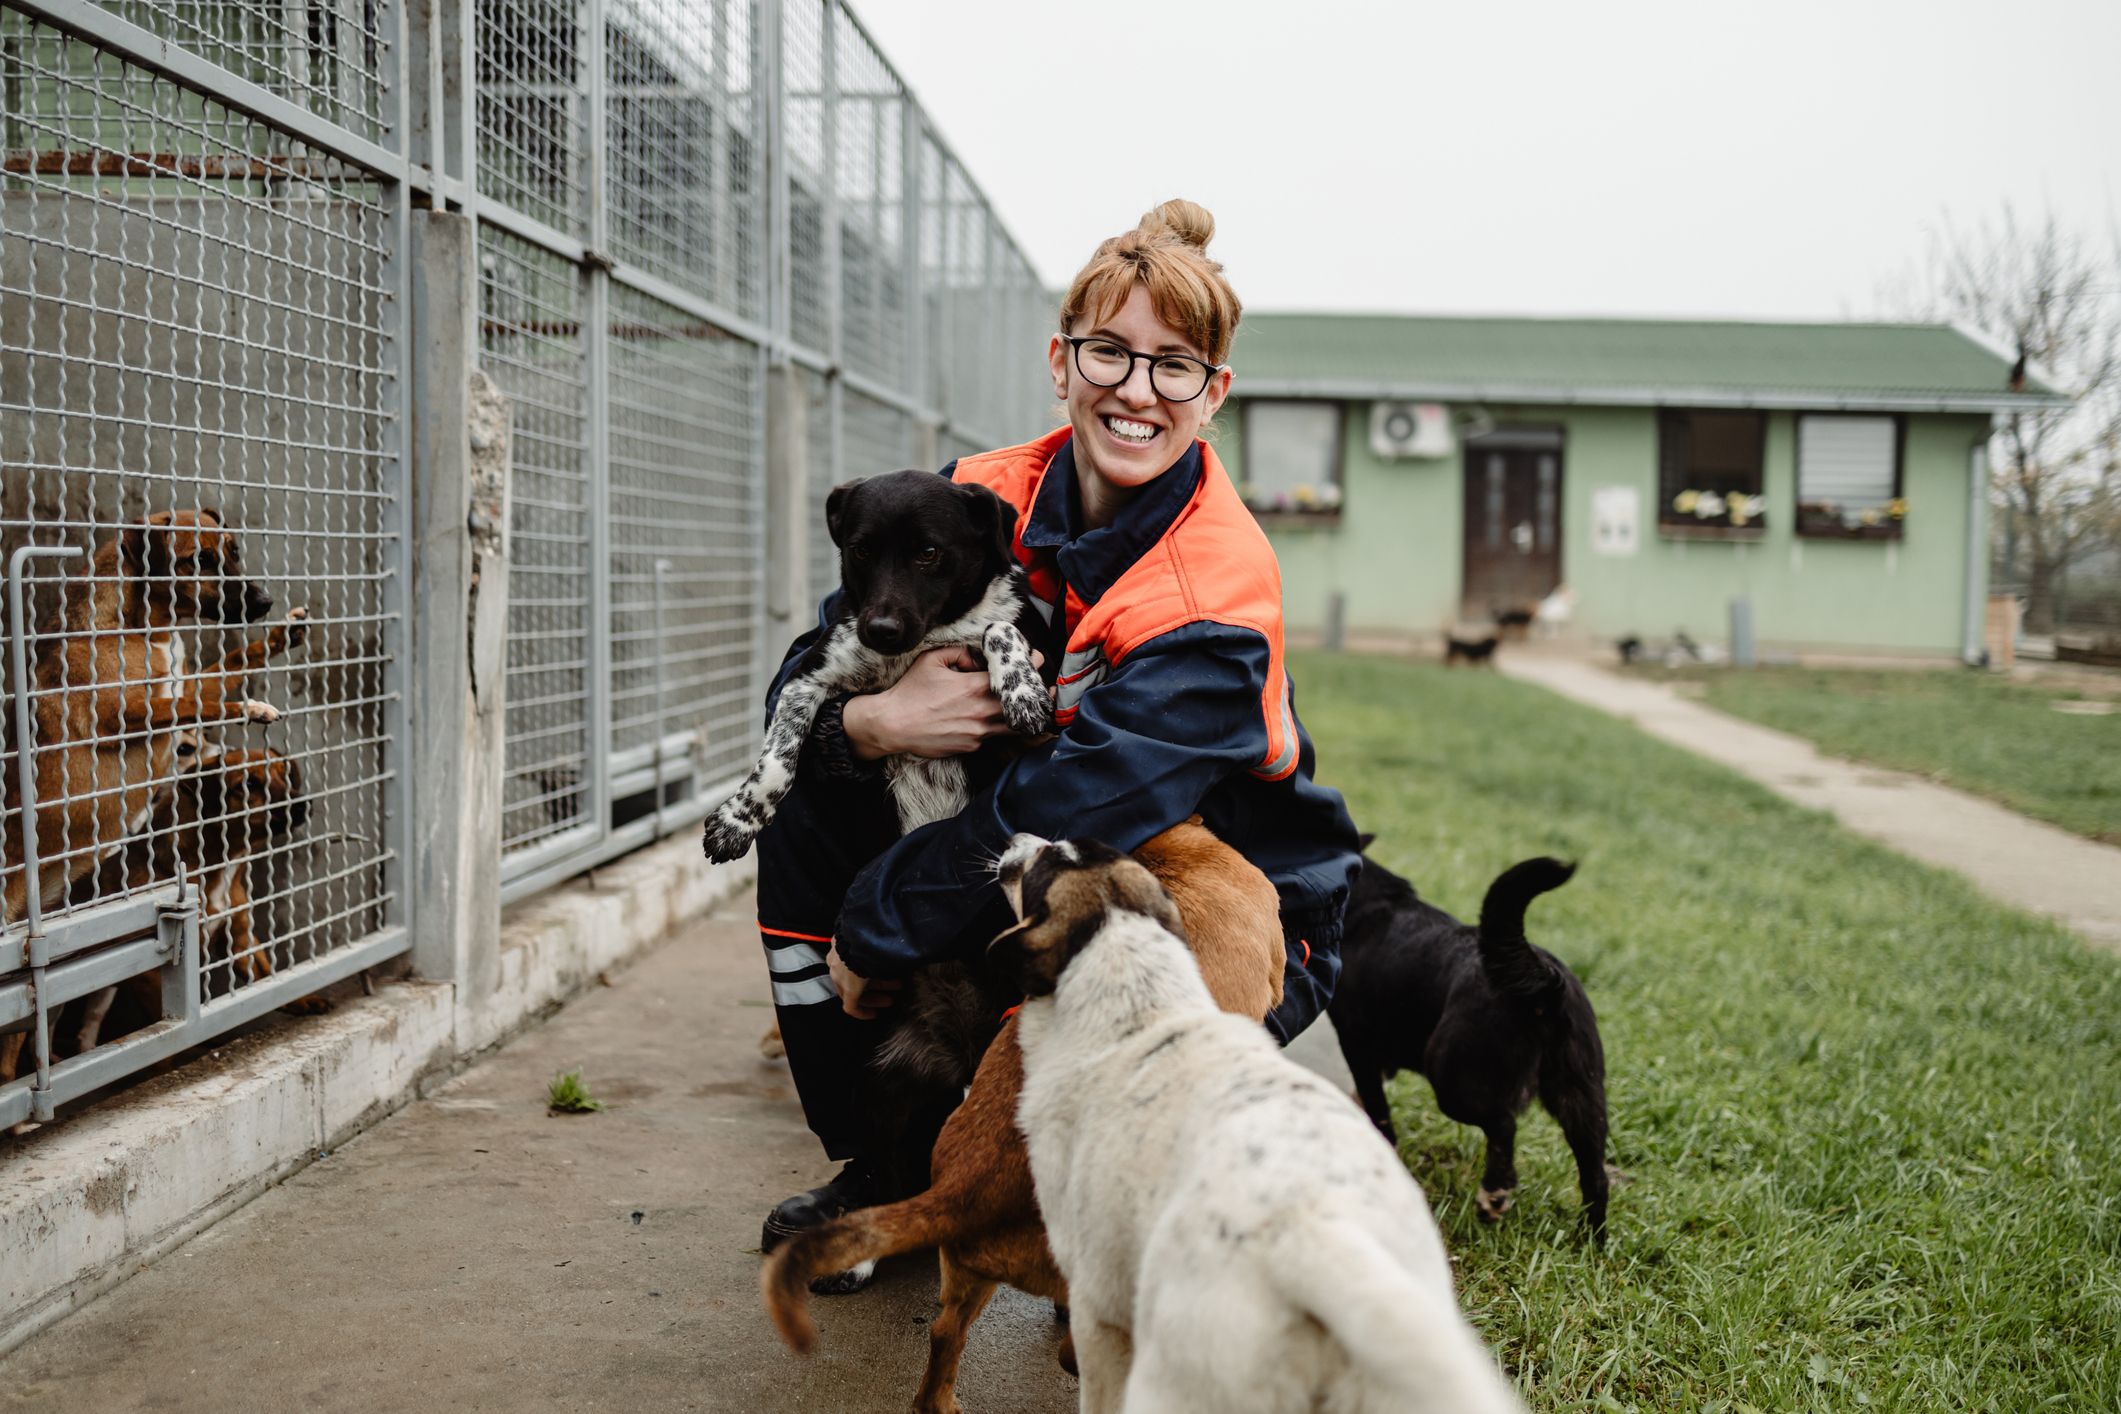 5 Health Benefits of Volunteering at an Animal Rescue